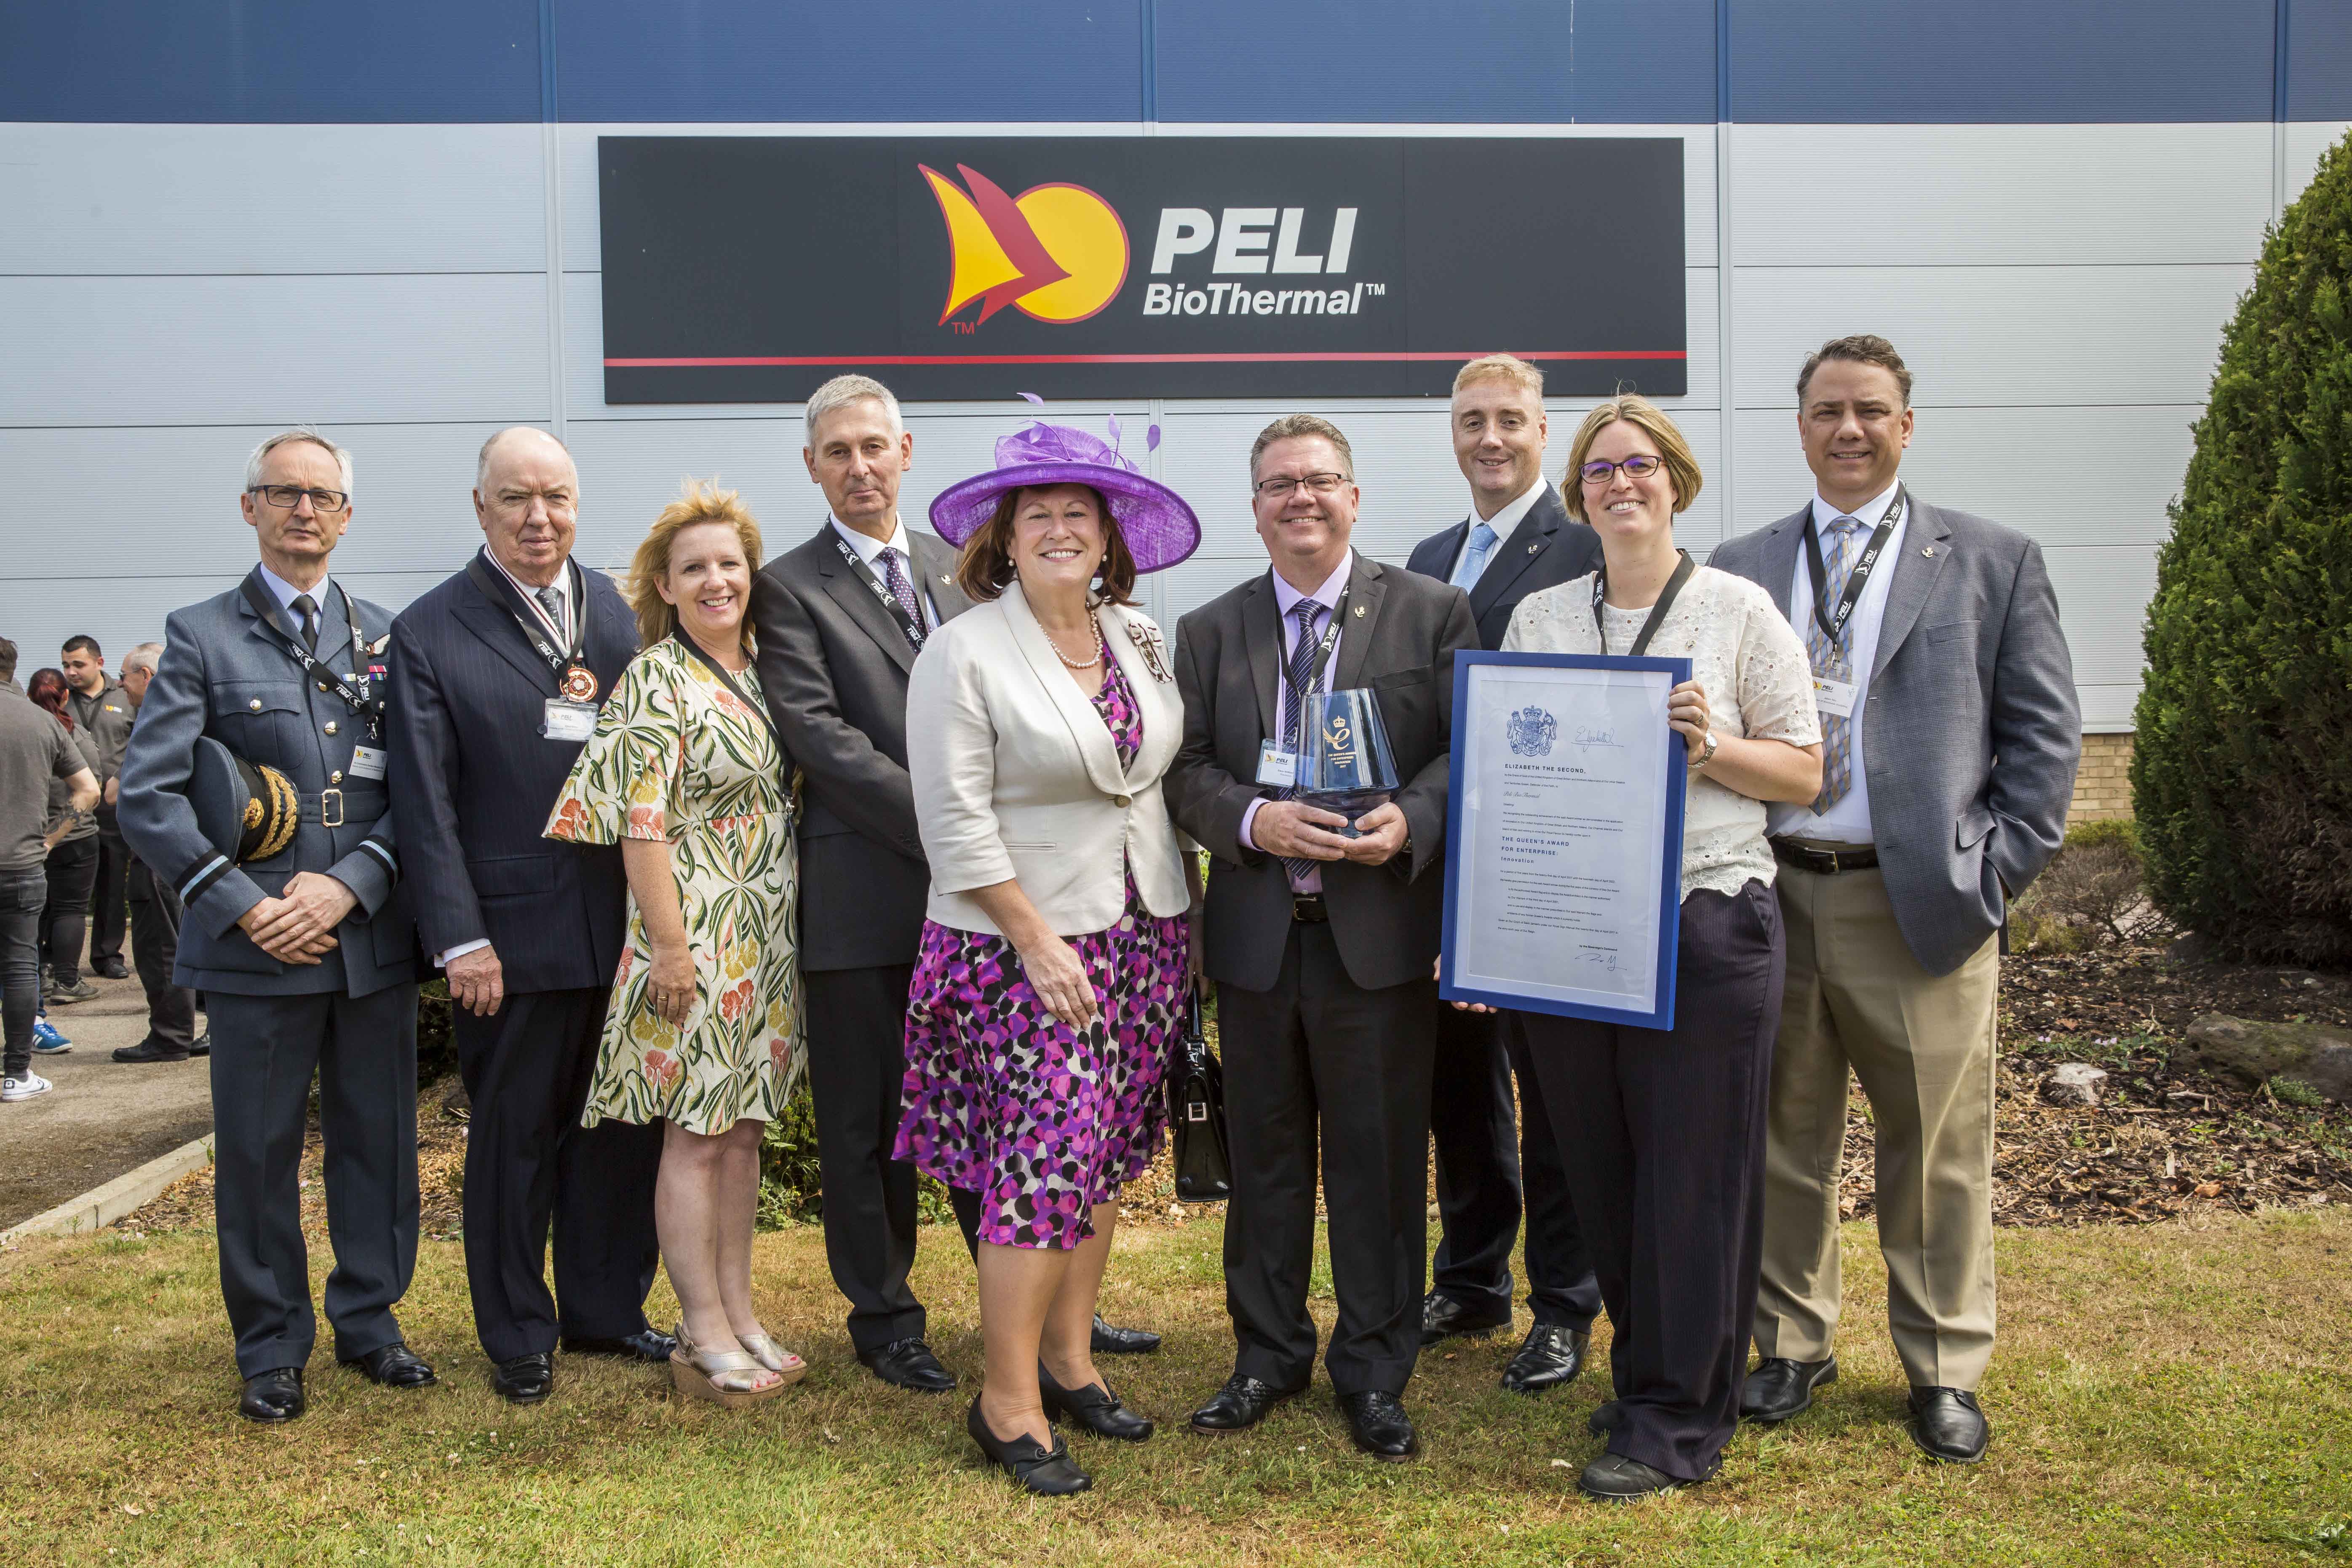 By Royal Appointment - Peli BioThermal Invited to Monarch’s Reception for Queen’s Award for Innovation